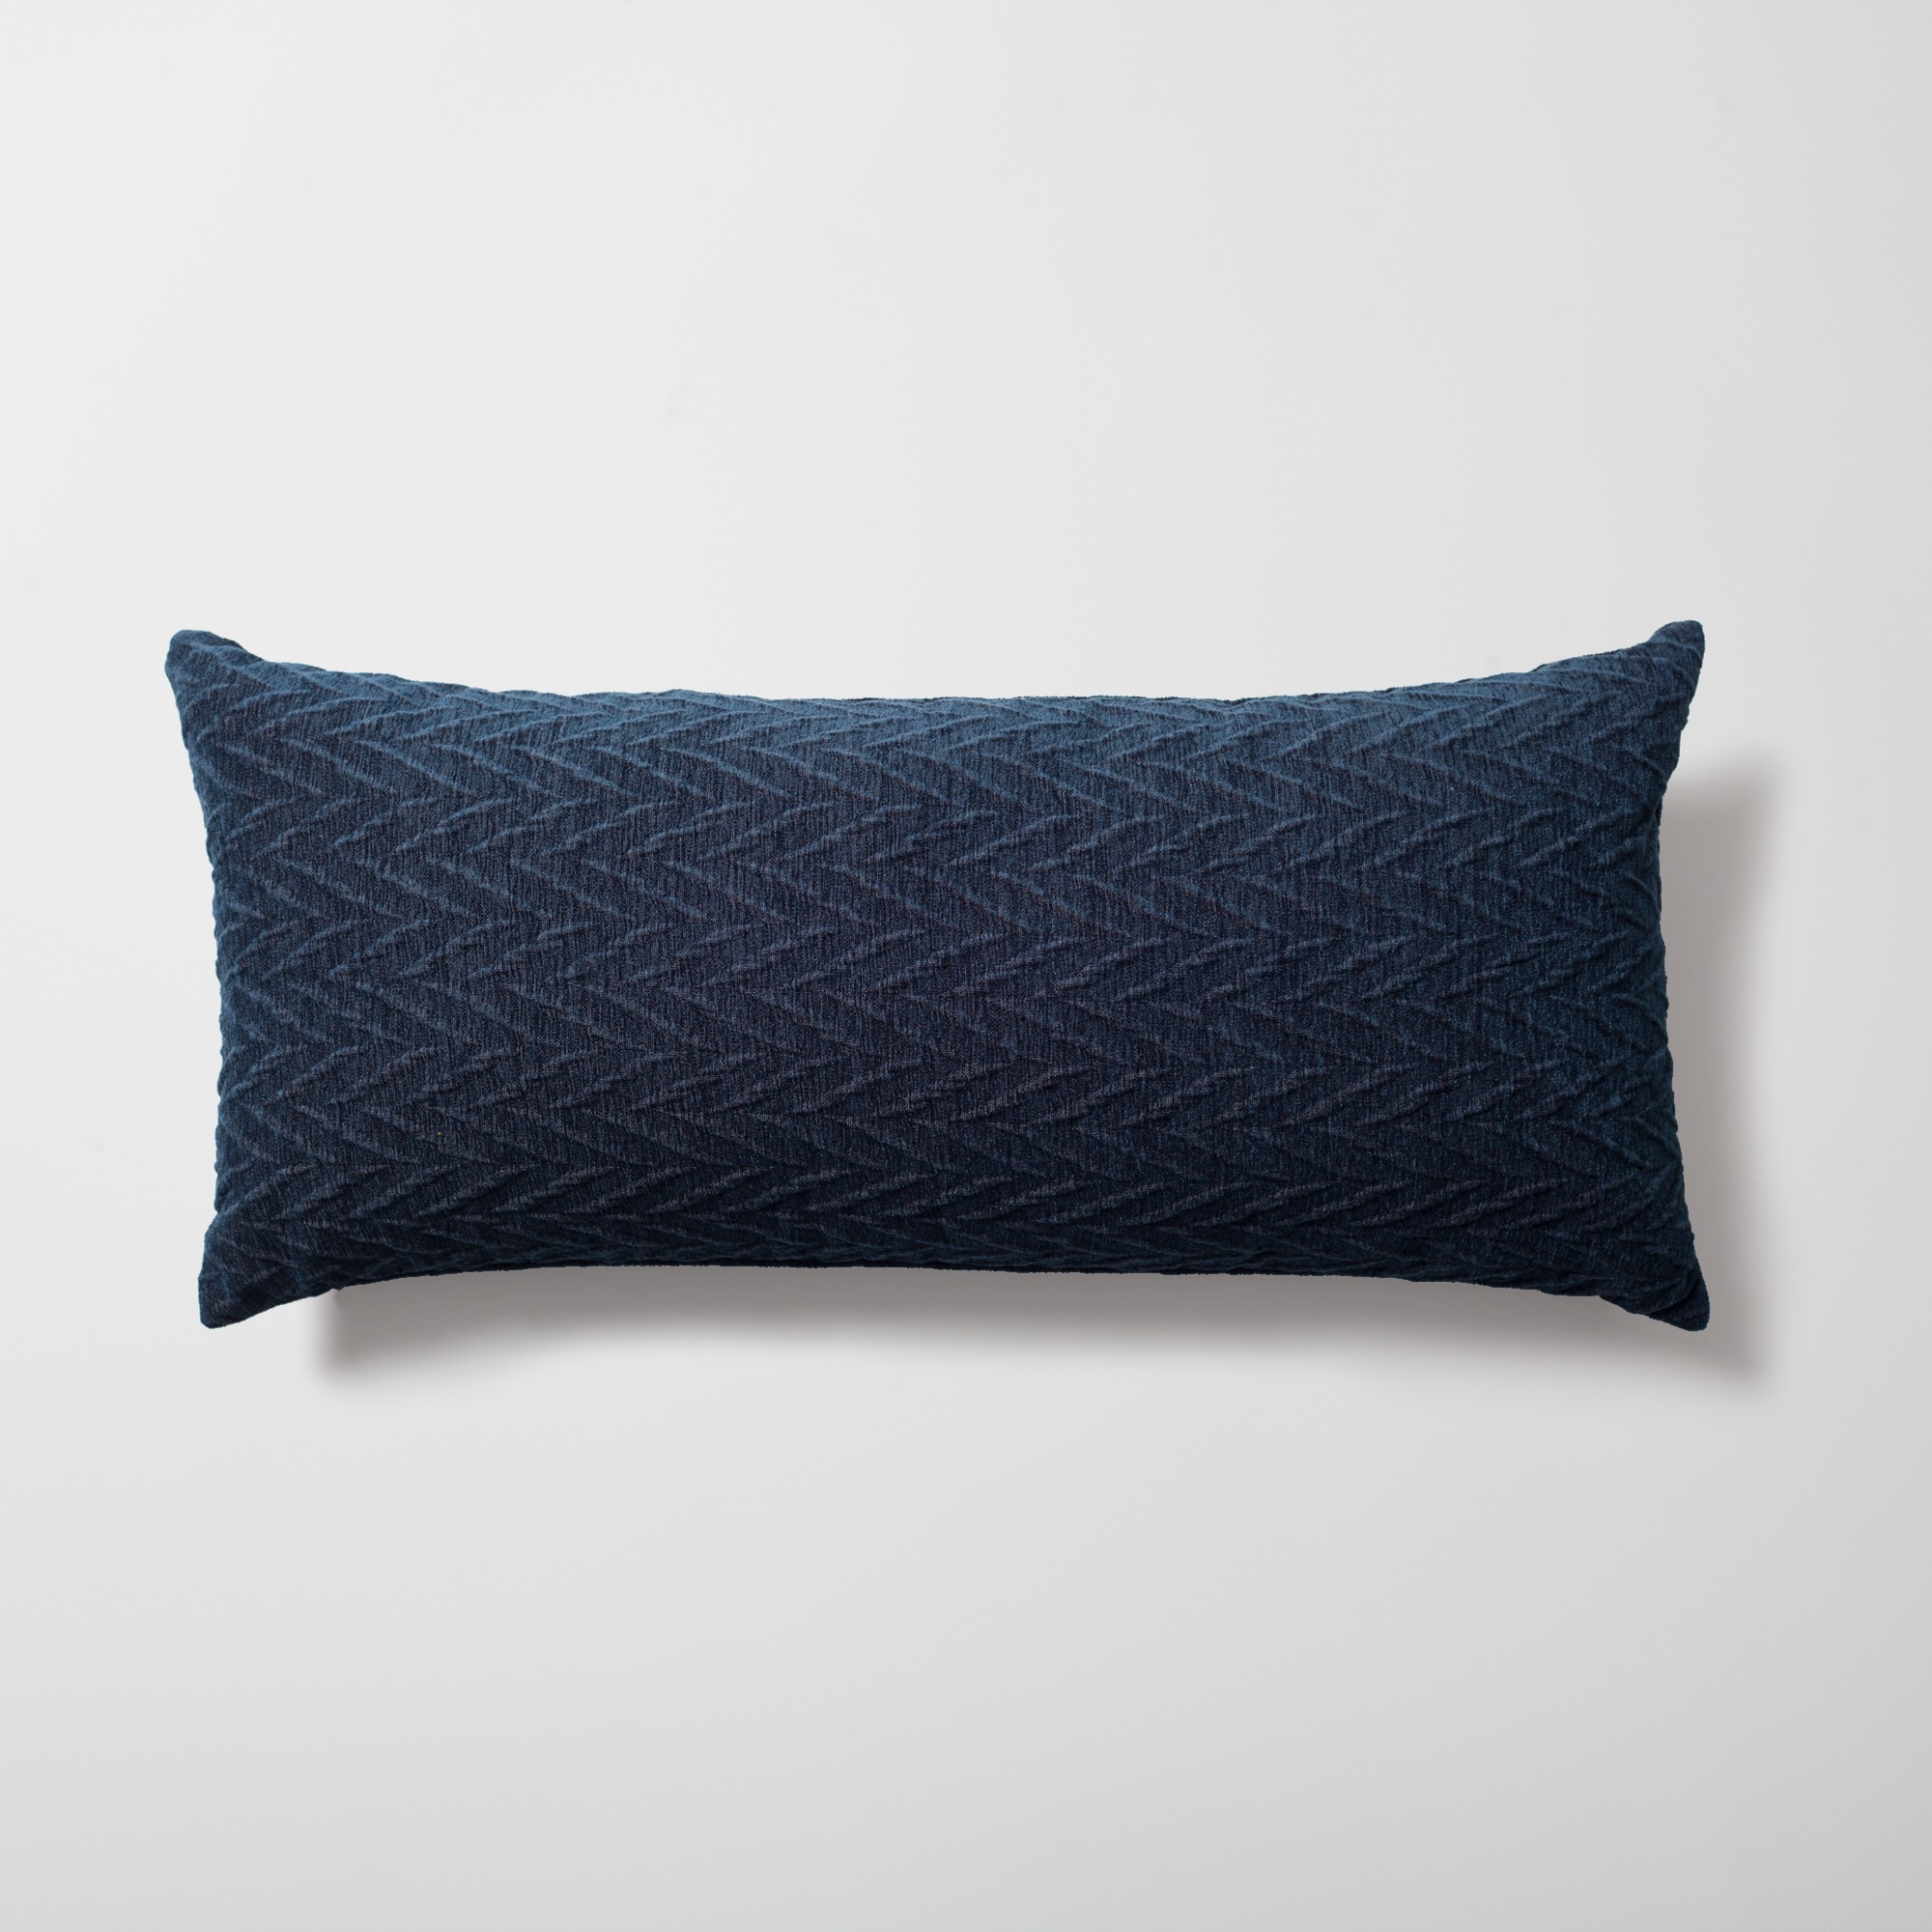 "Cello" - Embossed Pattern Cushion 14x28 Inch - Navy Blue (Cover Only)